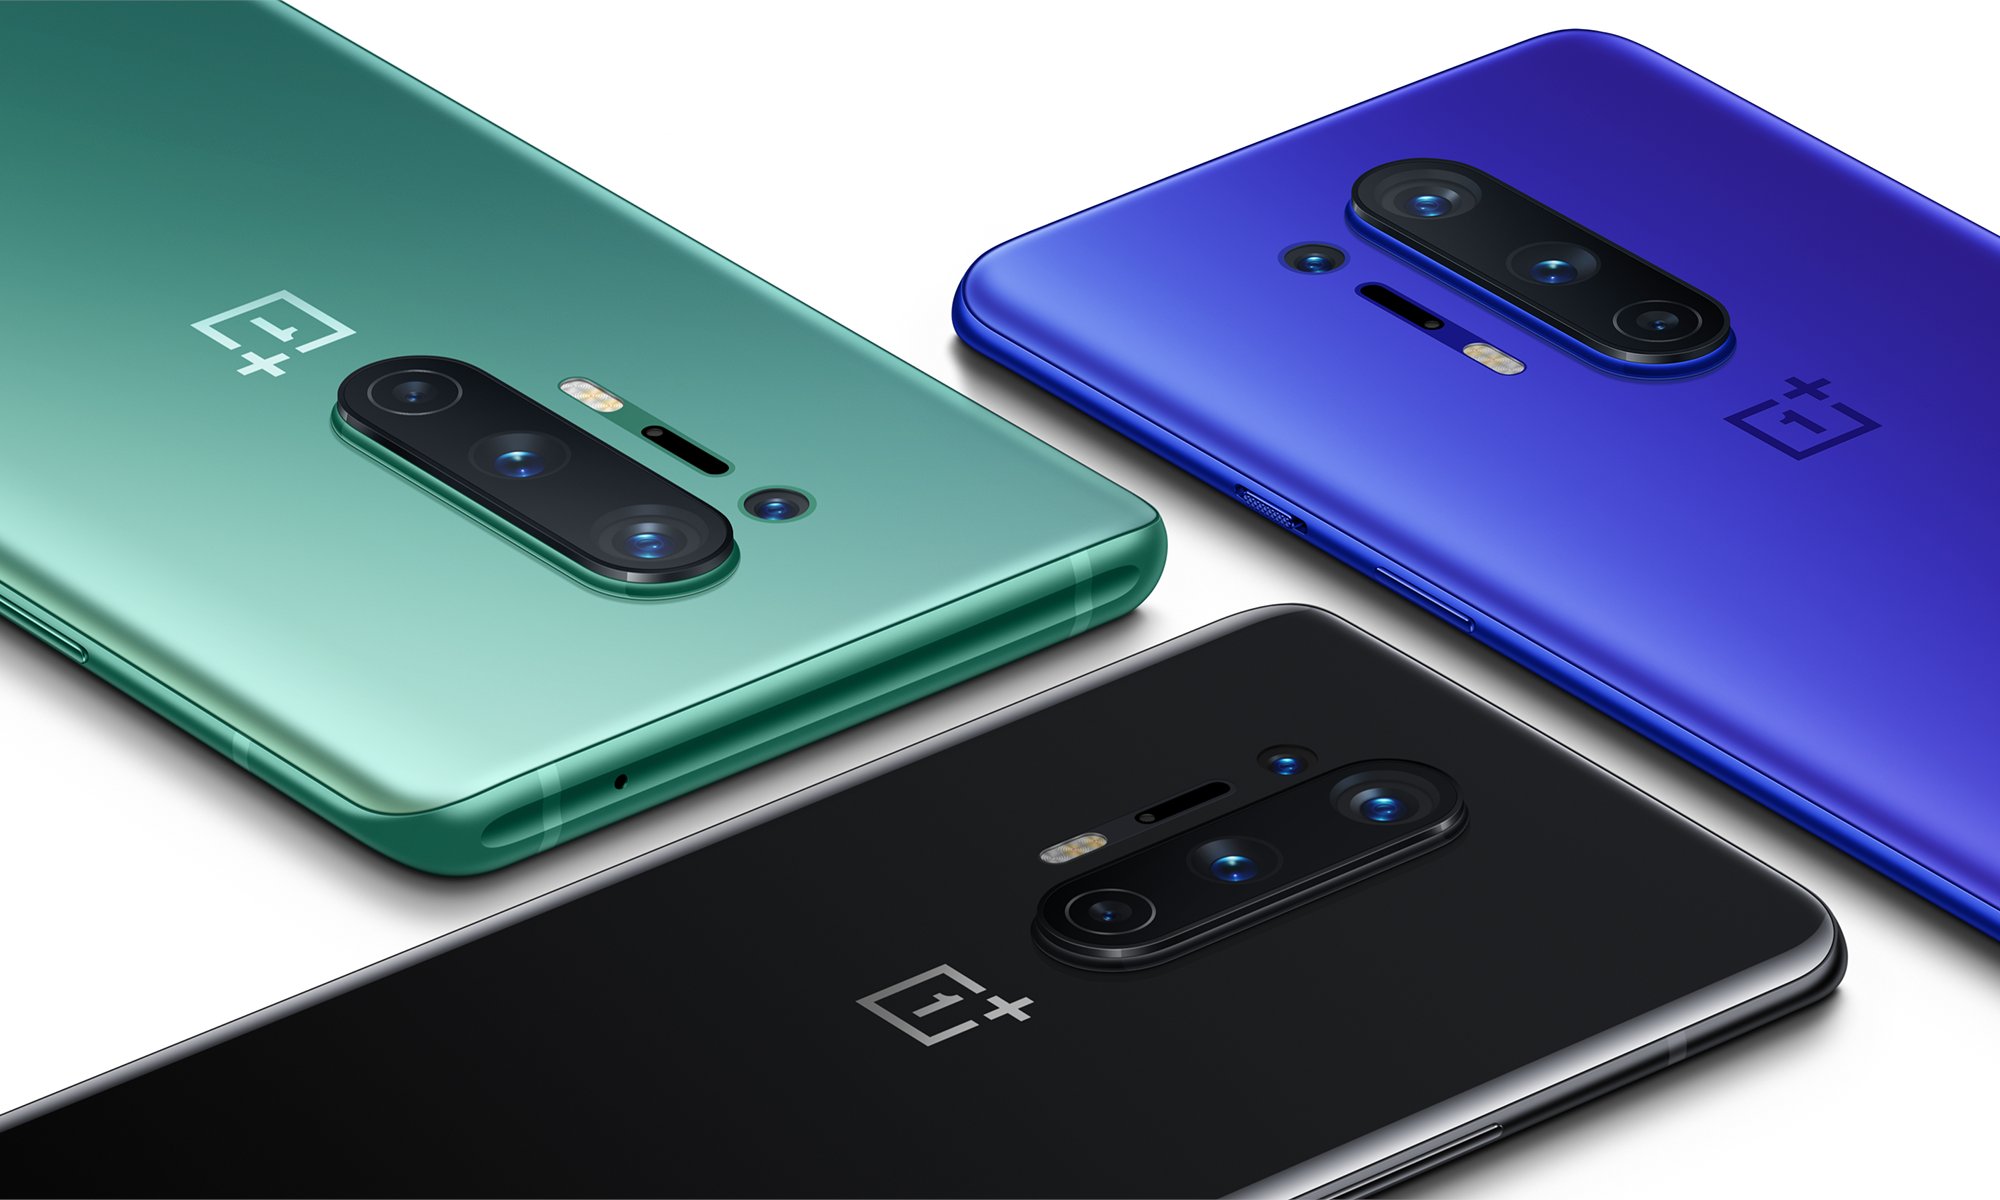 OnePlus 8 with Warp Charge 30T Fast Charging Launched: Features, Specifications and Price